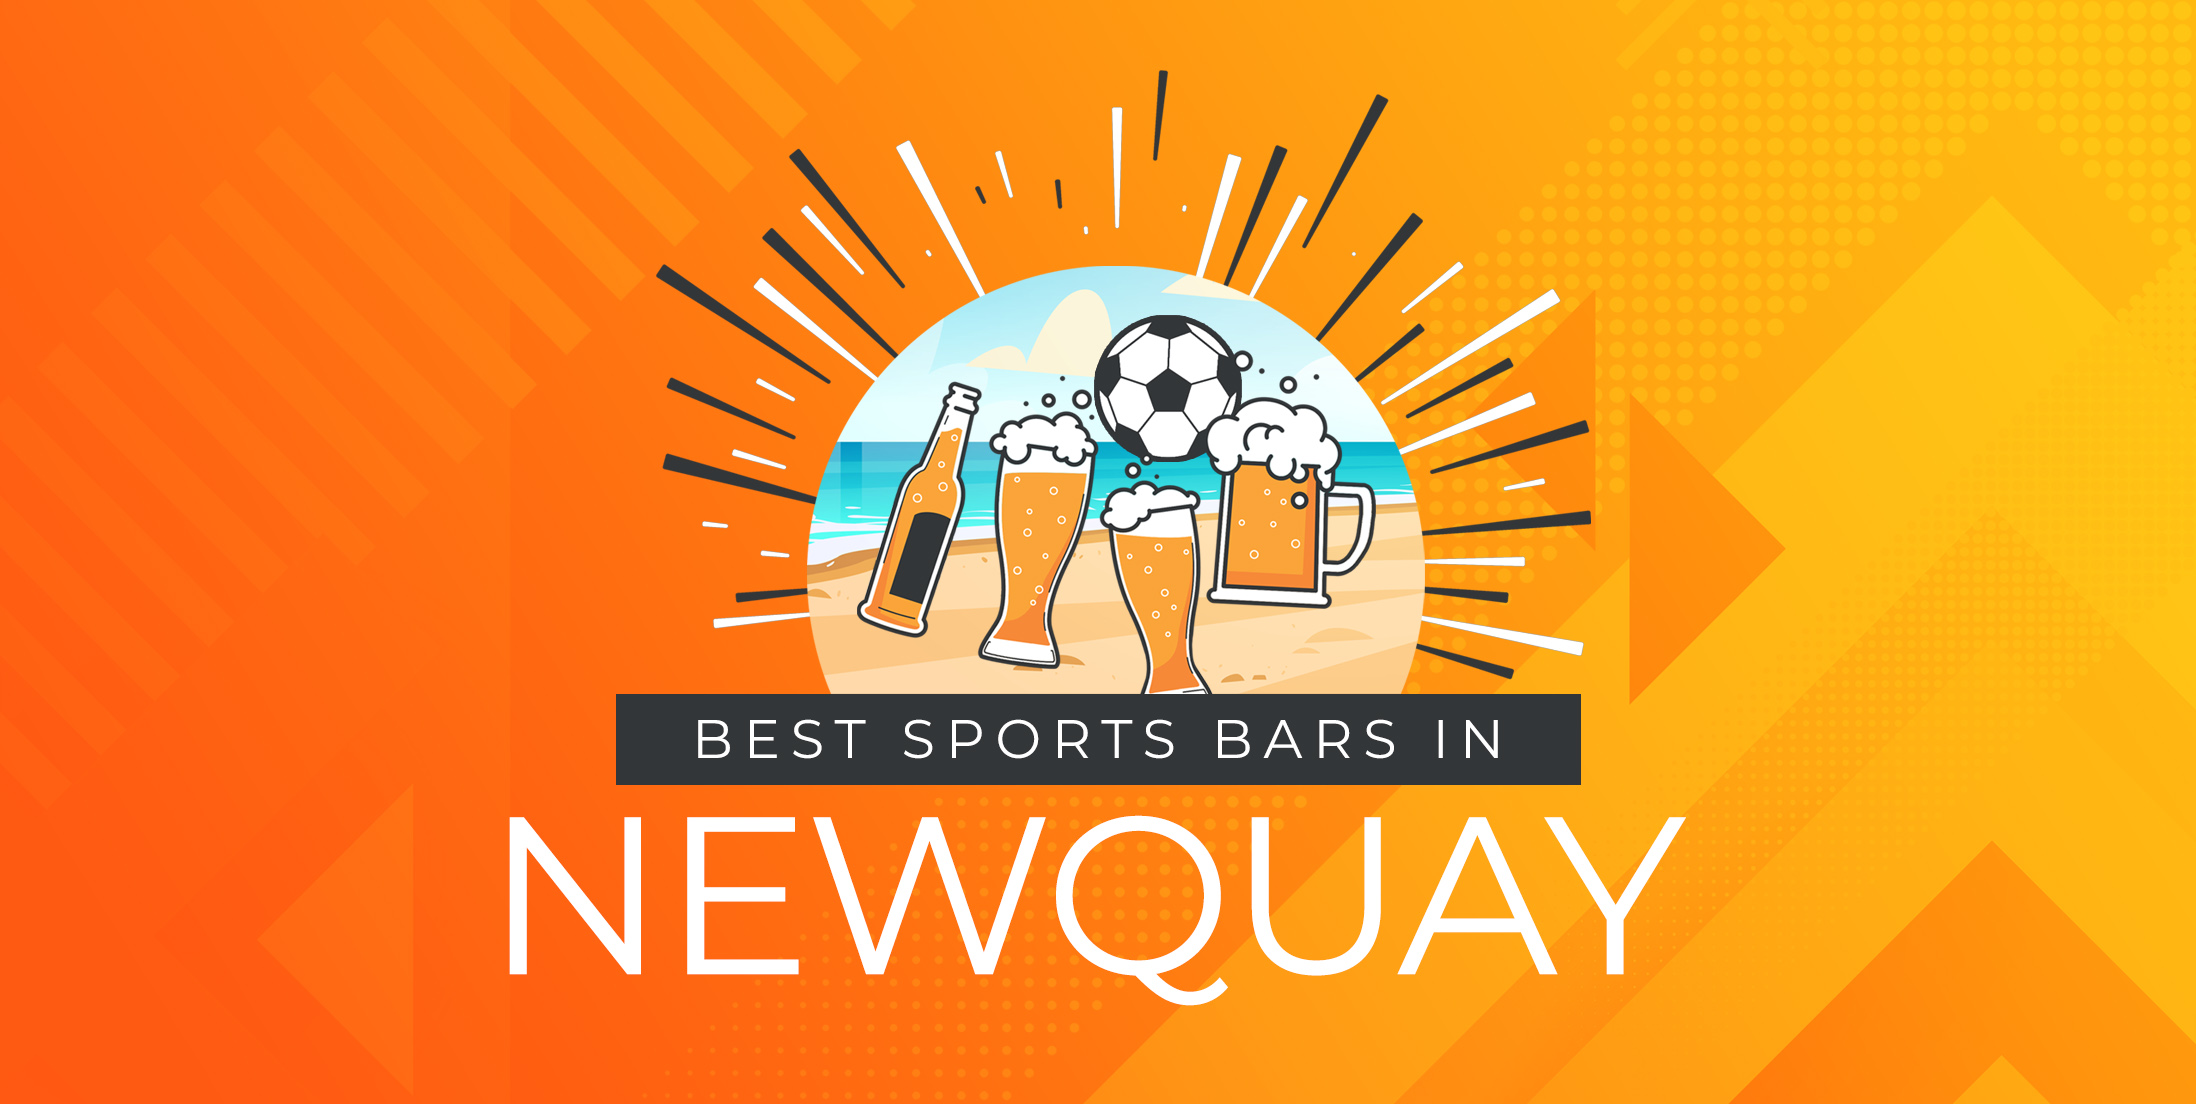 The Best Sports Bars in Newquay